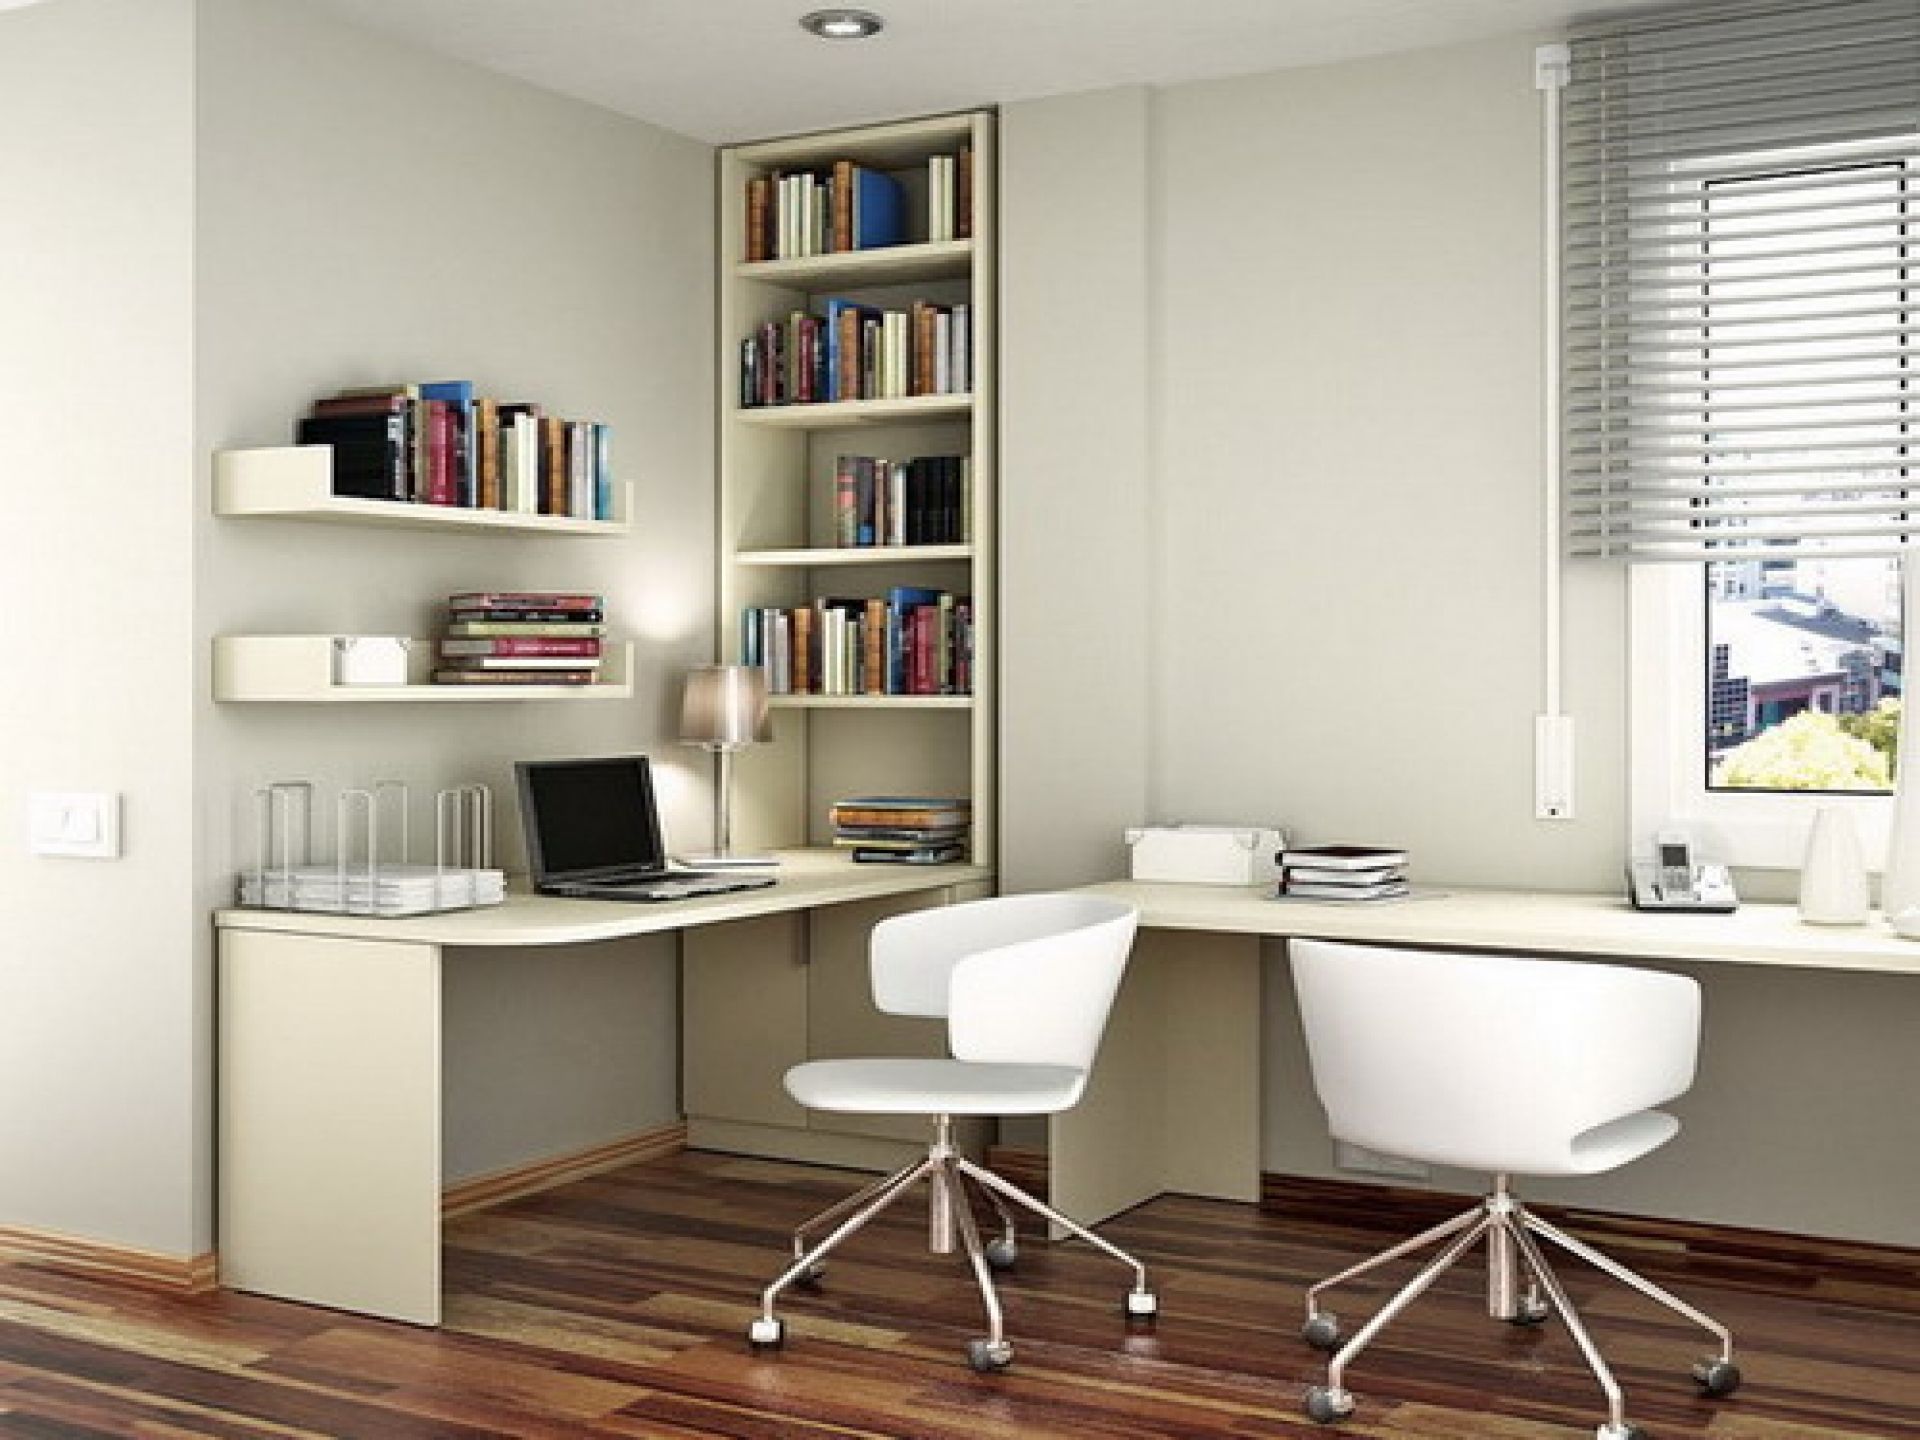 L Shaped Desk With Shelves Throughout Study Desk With Bookshelf (View 11 of 15)